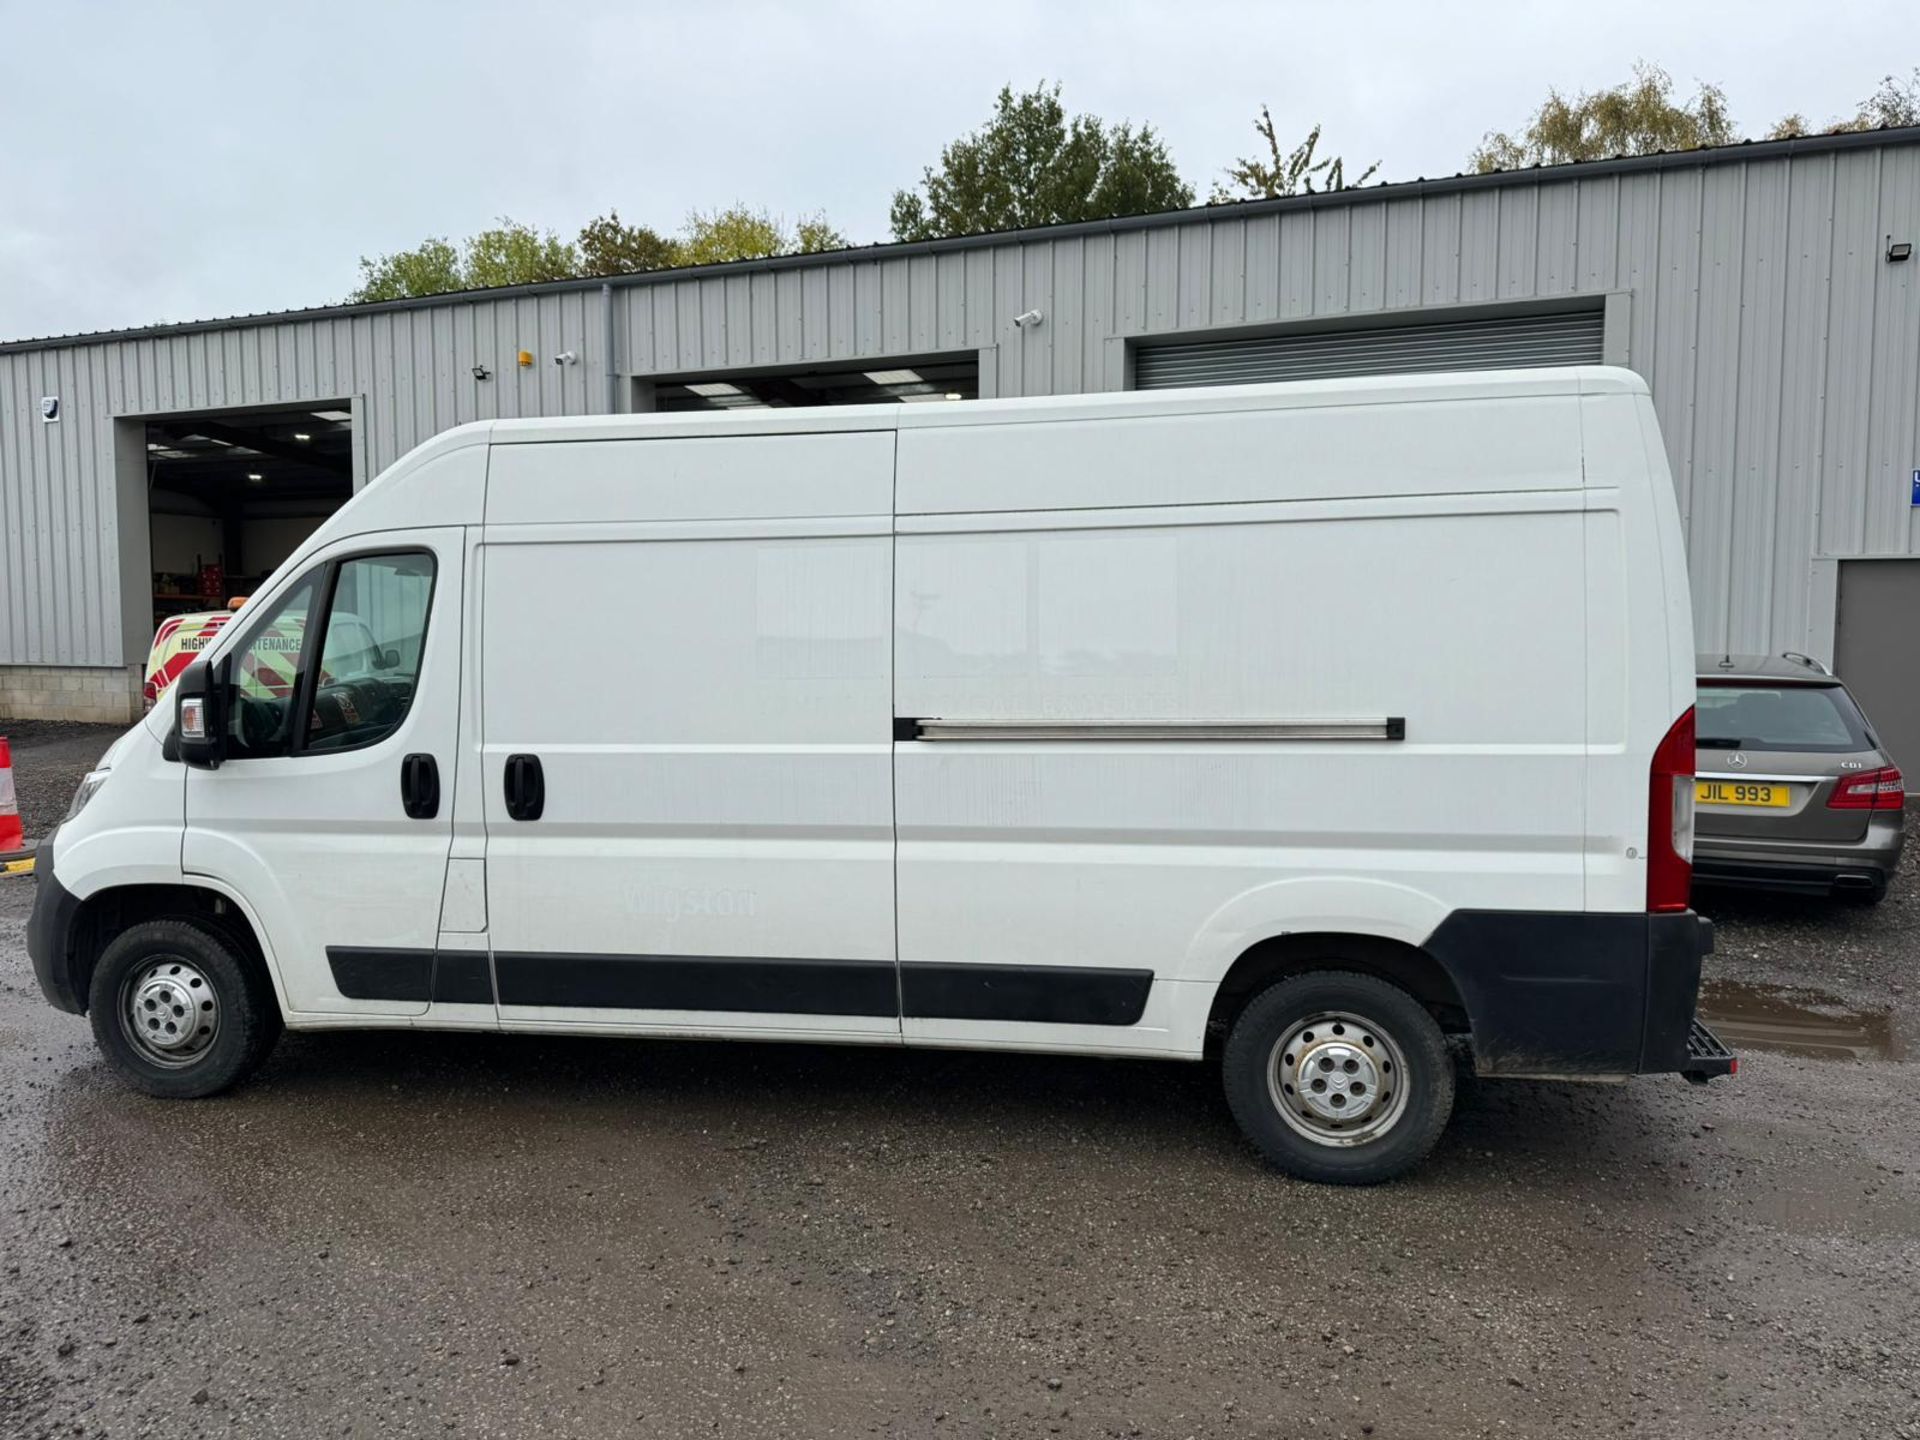 2019 19 CITROEN RELAY PANEL VAN -140K MILES - L3 H2 MODEL - PLY LINED - AIR CON - Image 8 of 8